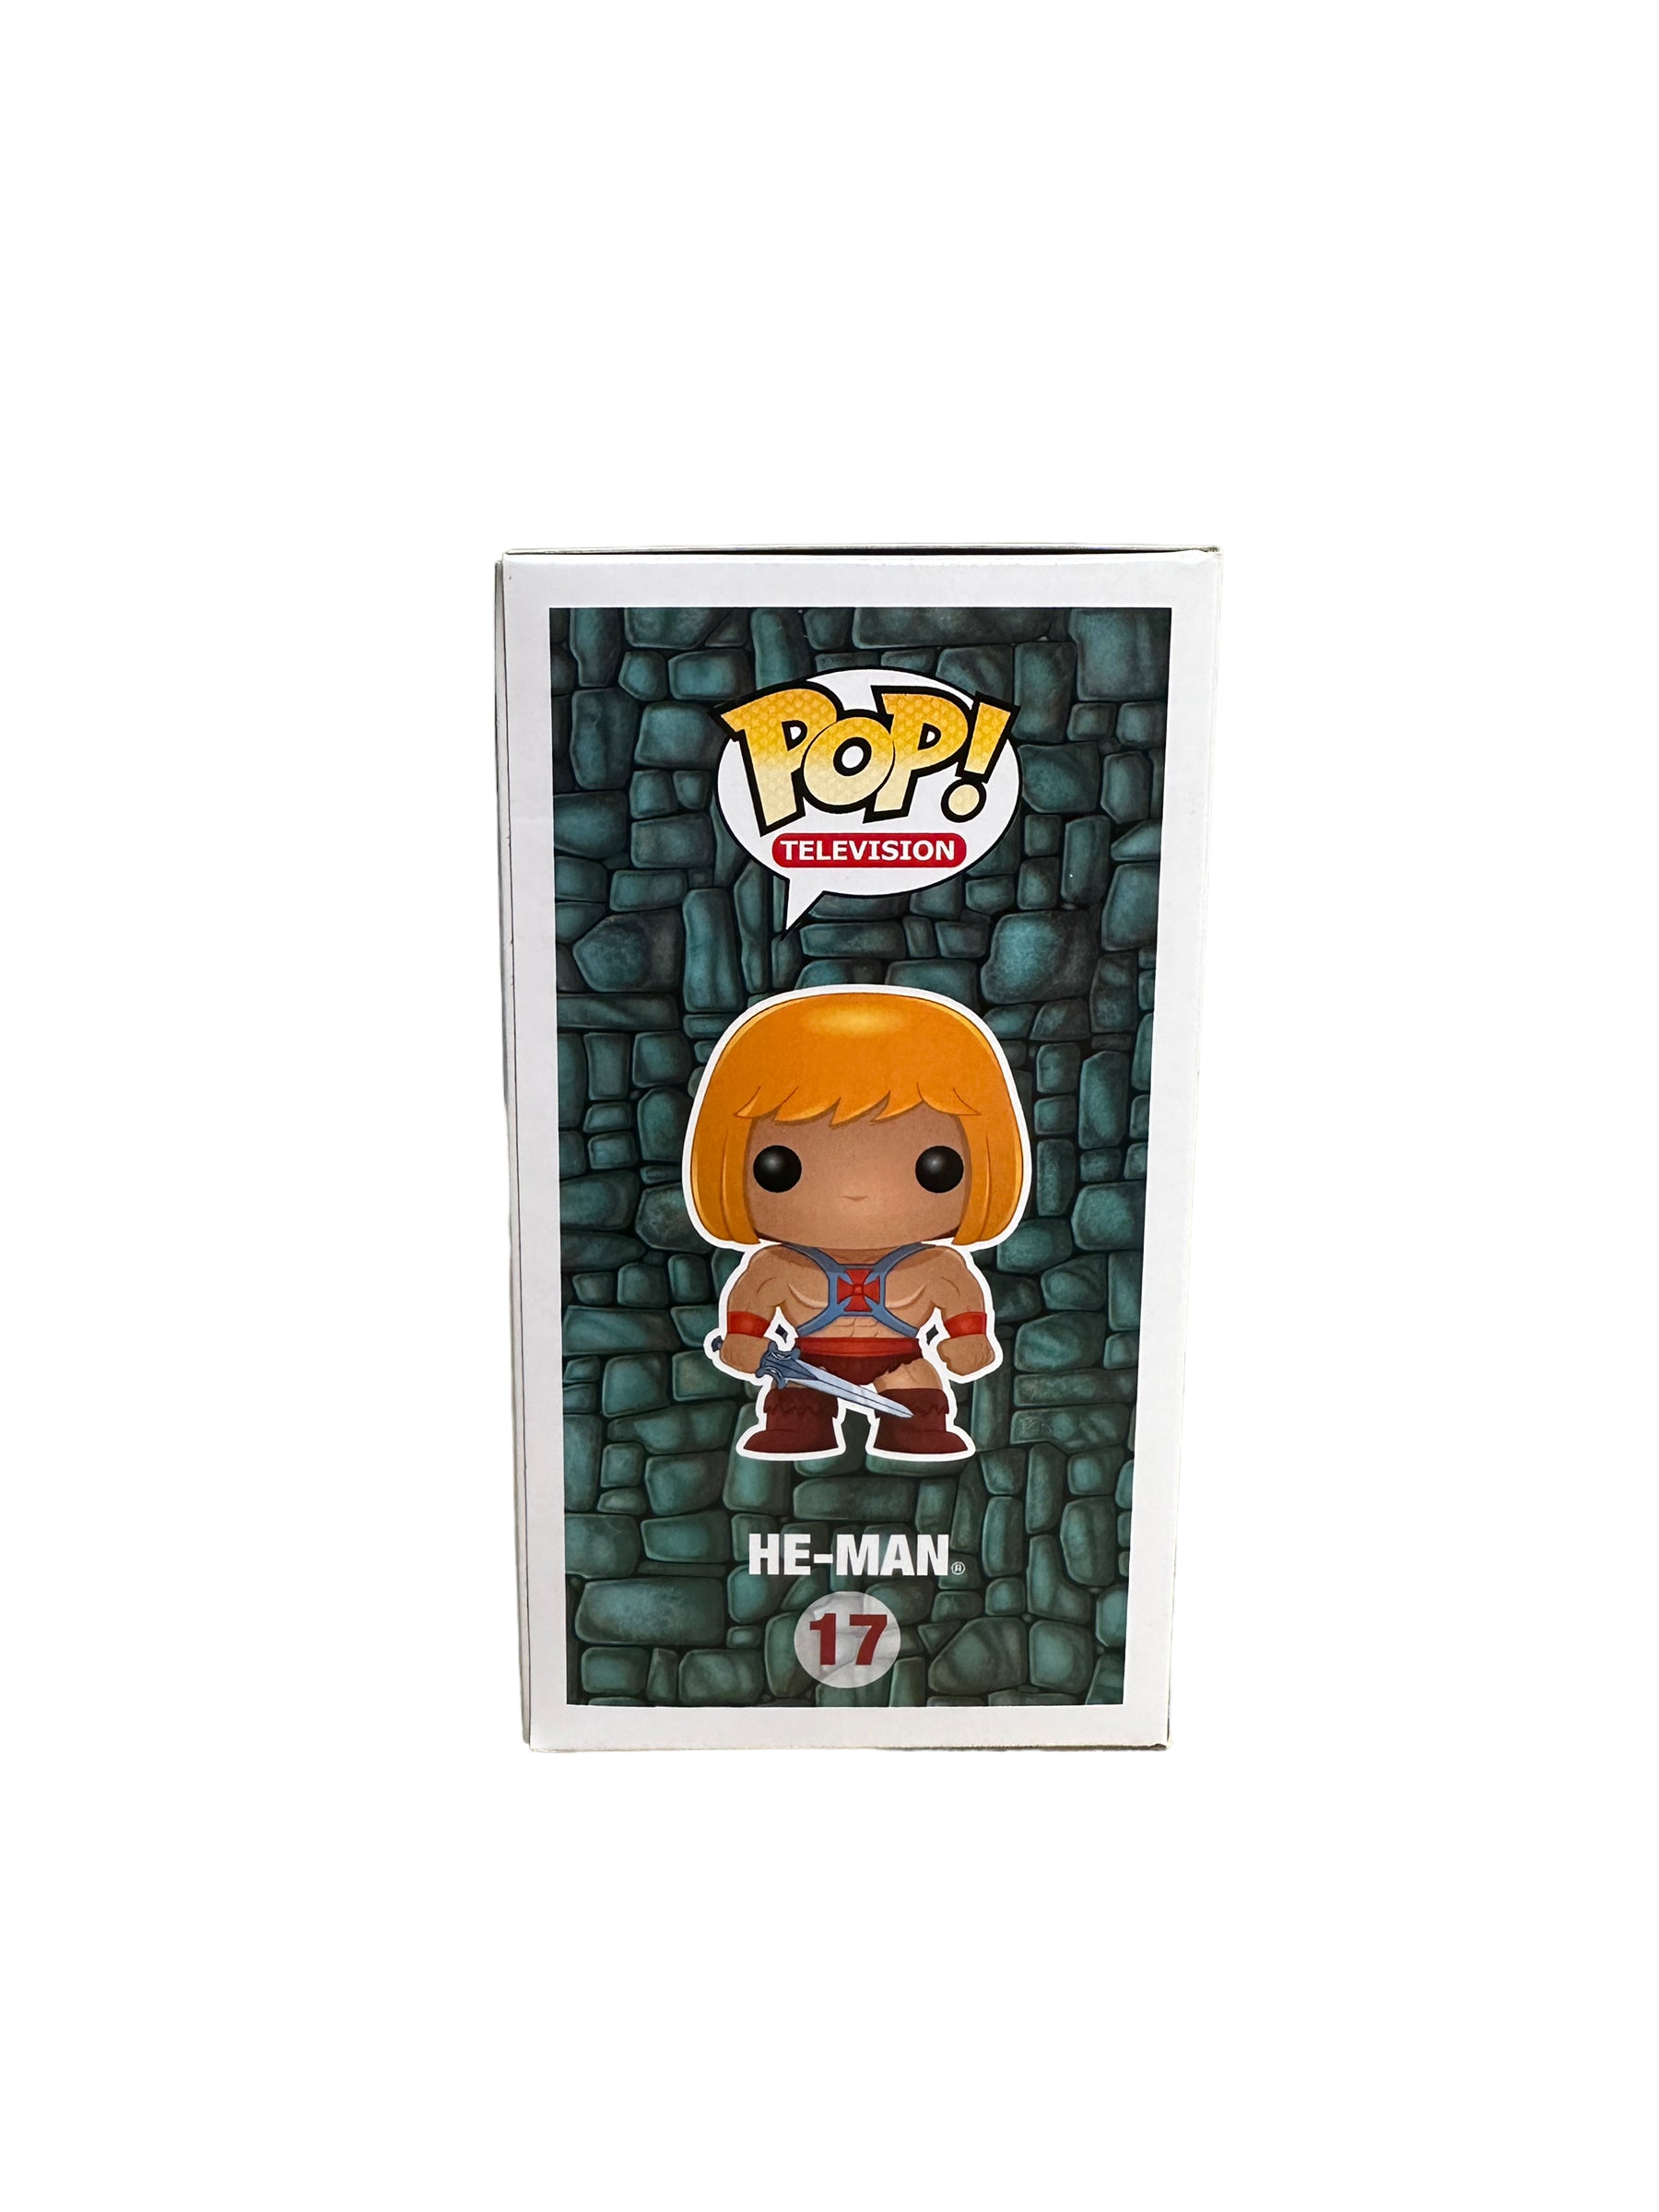 He-Man #17 Funko Pop! - Masters of the Universe - 2015 Pop! - Condition 8.5/10